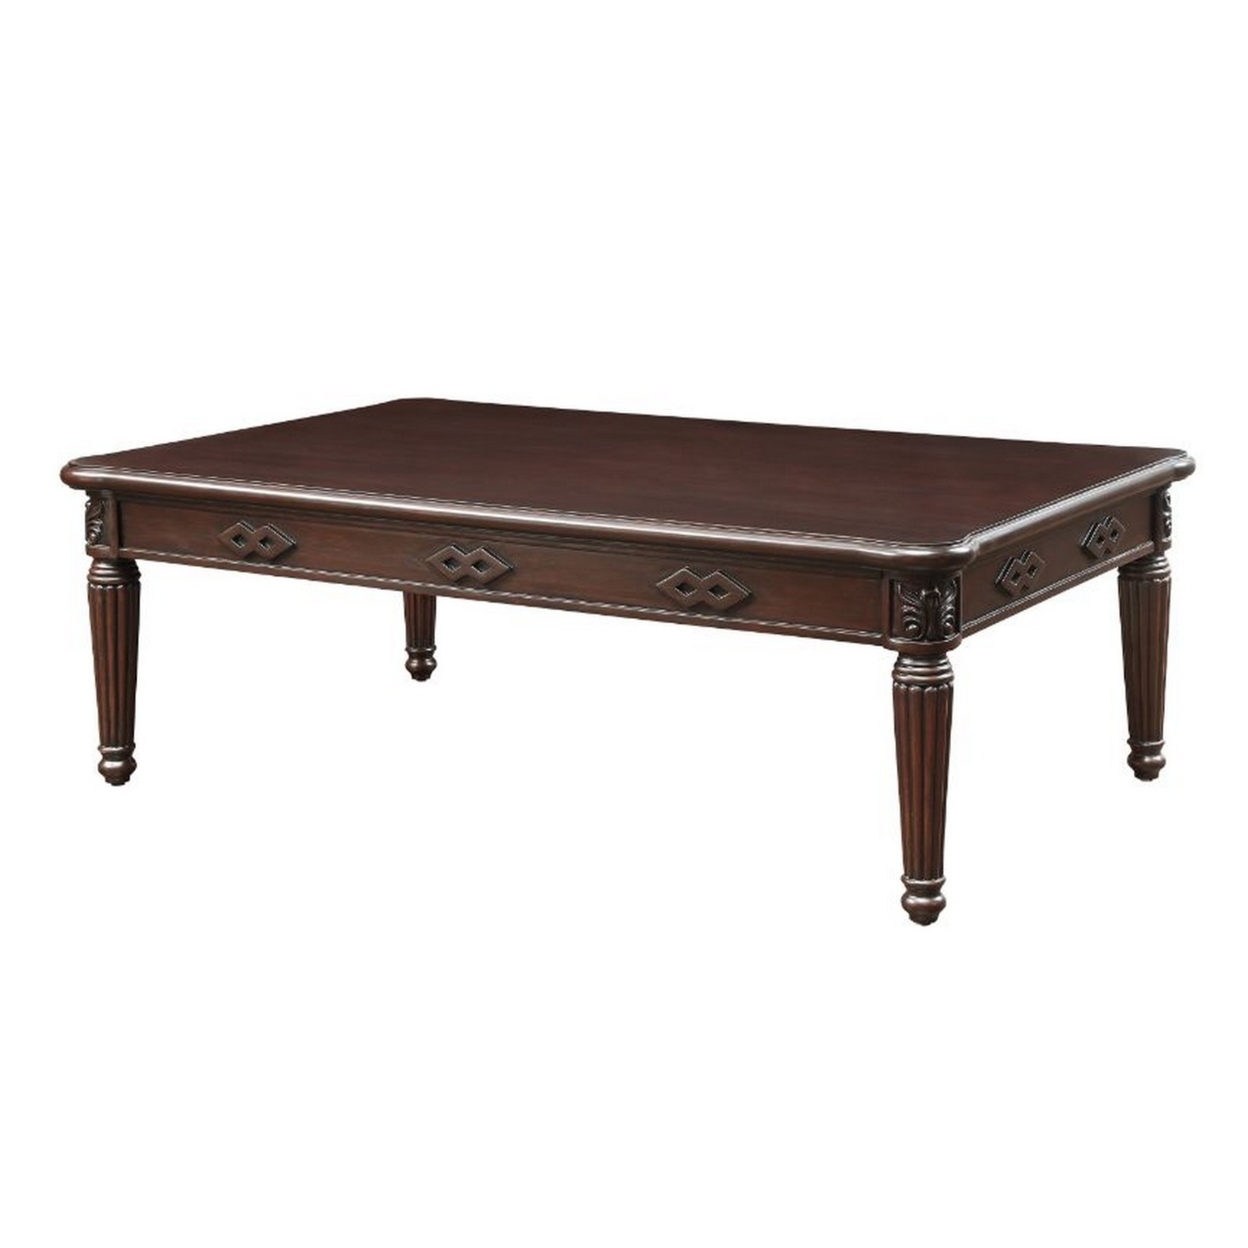 Coffee Table With Traditional Style And Turned Legs, Espresso Brown- Saltoro Sherpi